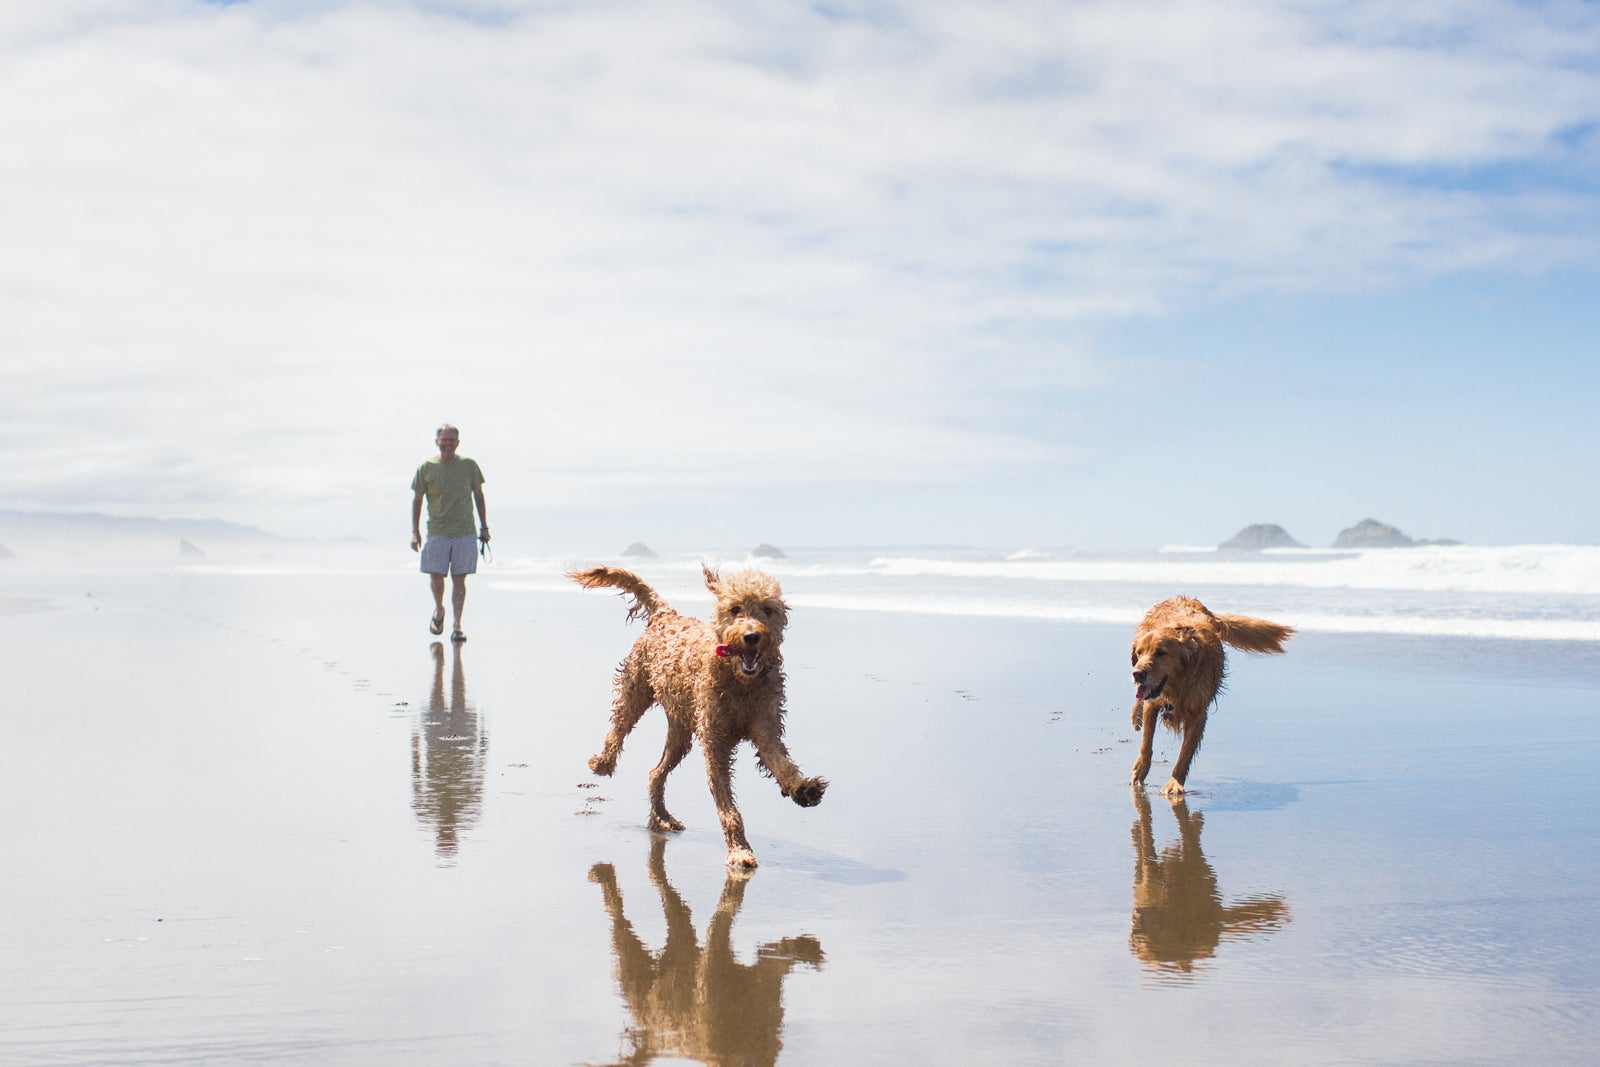 Frolicking on the beach with dogs